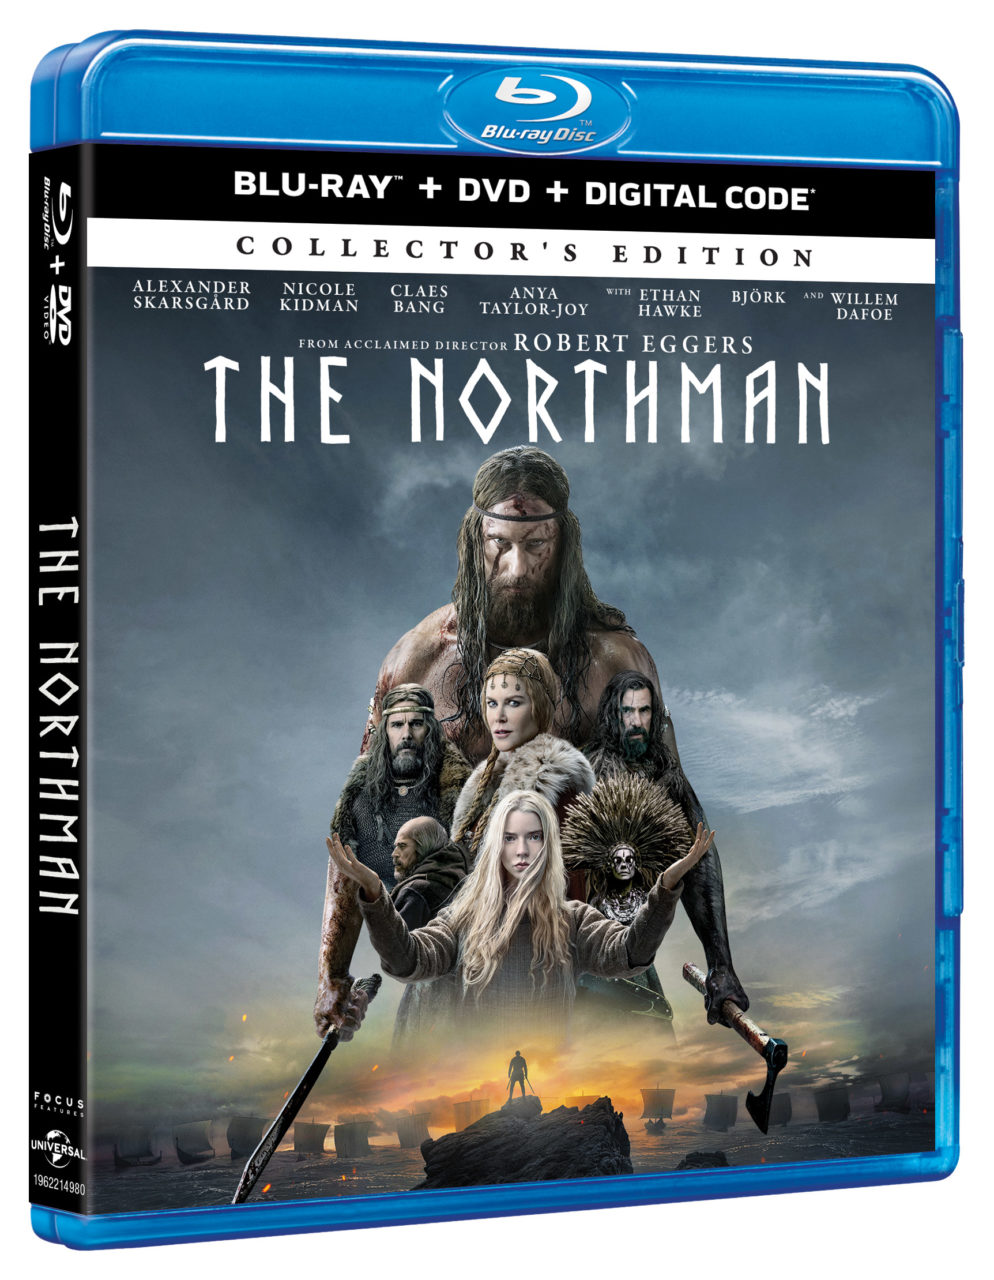 The Northman Blu-Ray Combo Pack Collector's Edition cover (Universal Pictures Home Entertainment)